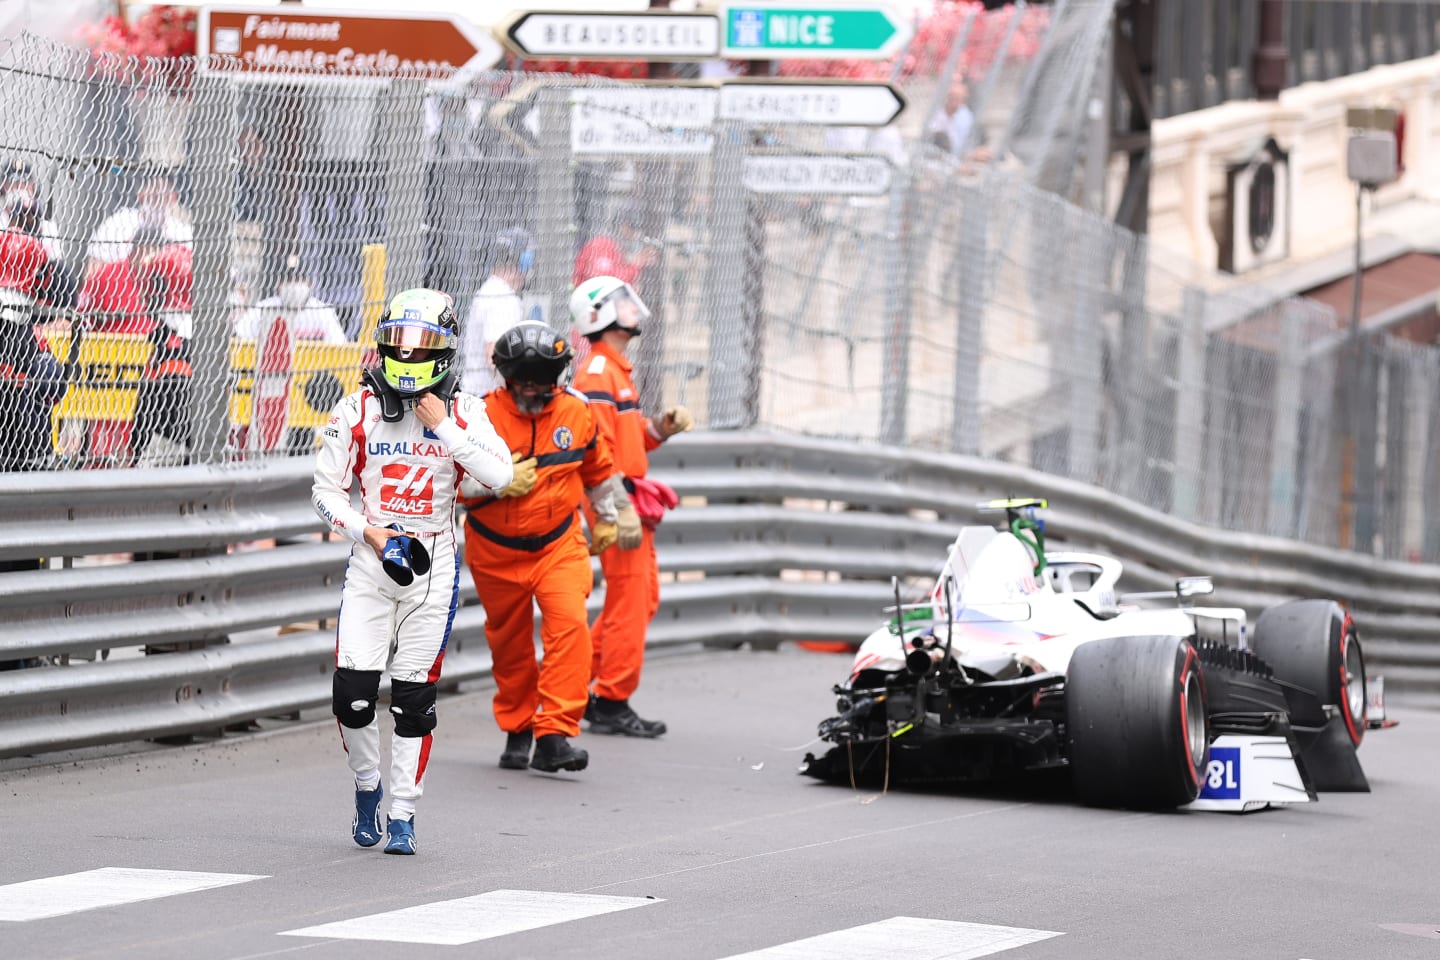 MONTE-CARLO, MONACO - MAY 22: Mick Schumacher of Germany and Haas F1 walks away from his car after